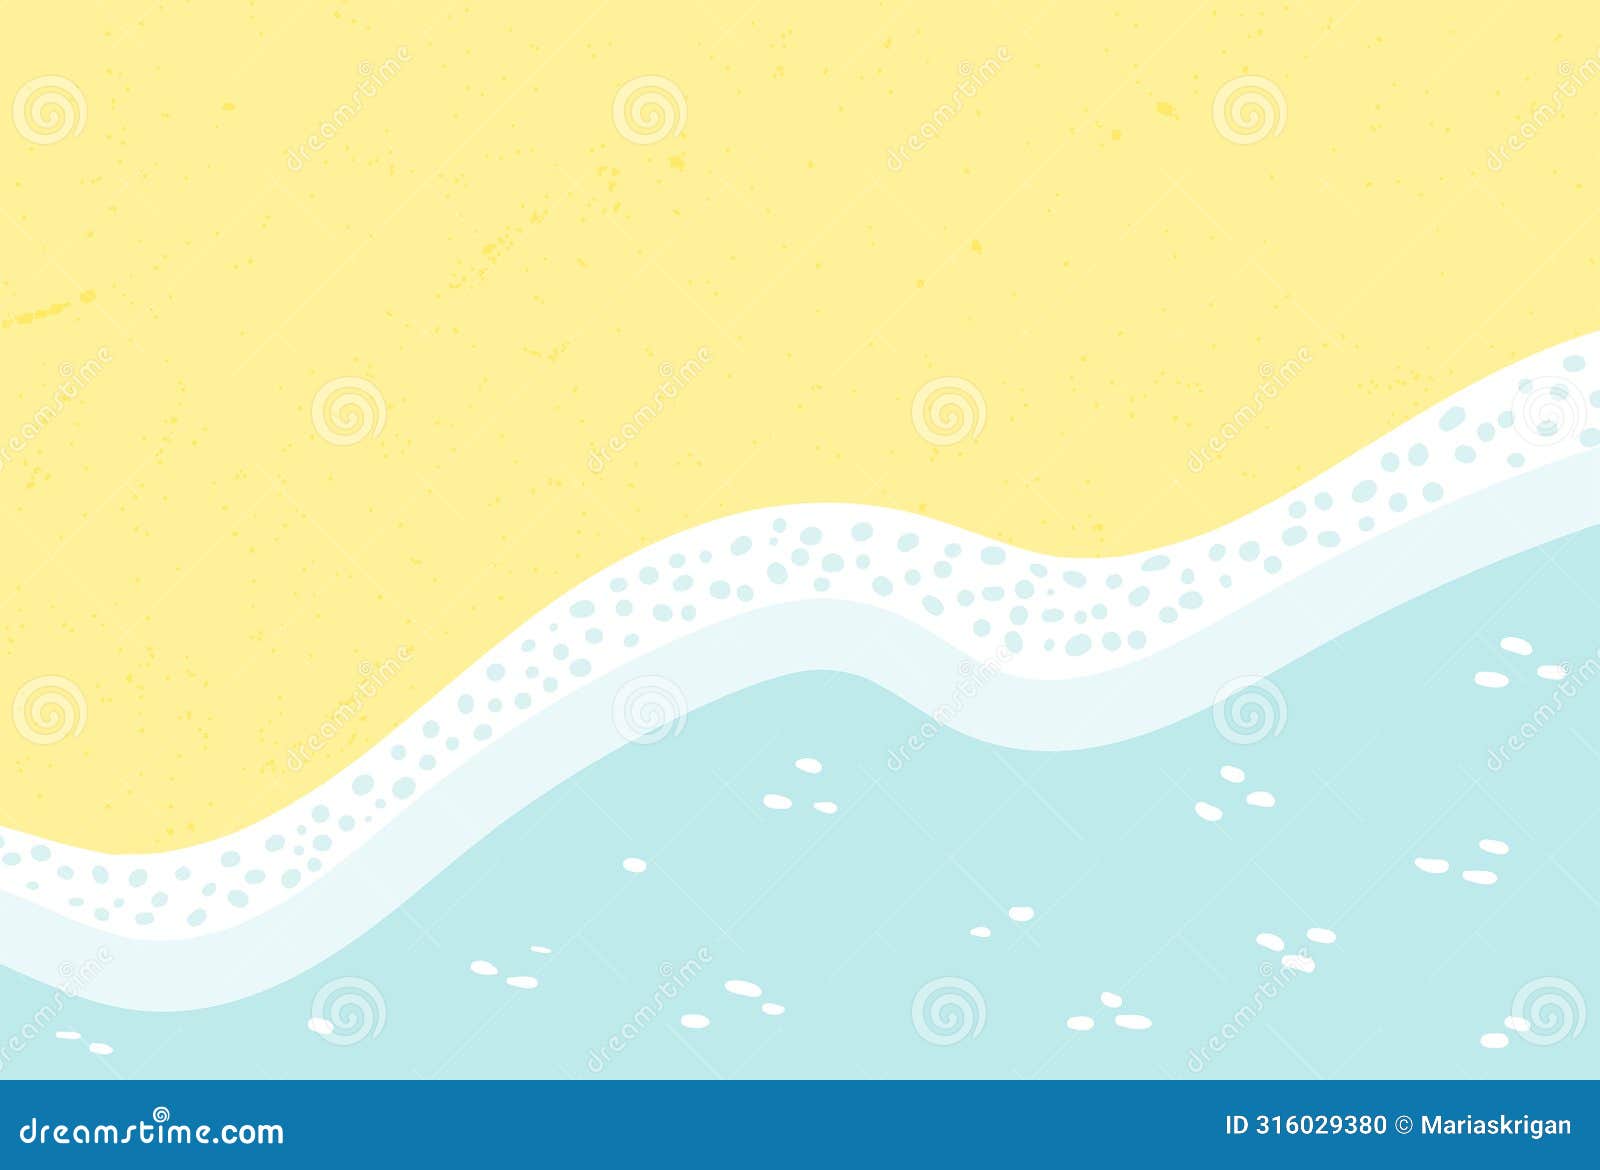 sandy beach with sea, ocean waves lapping on shore, seaside top view background.